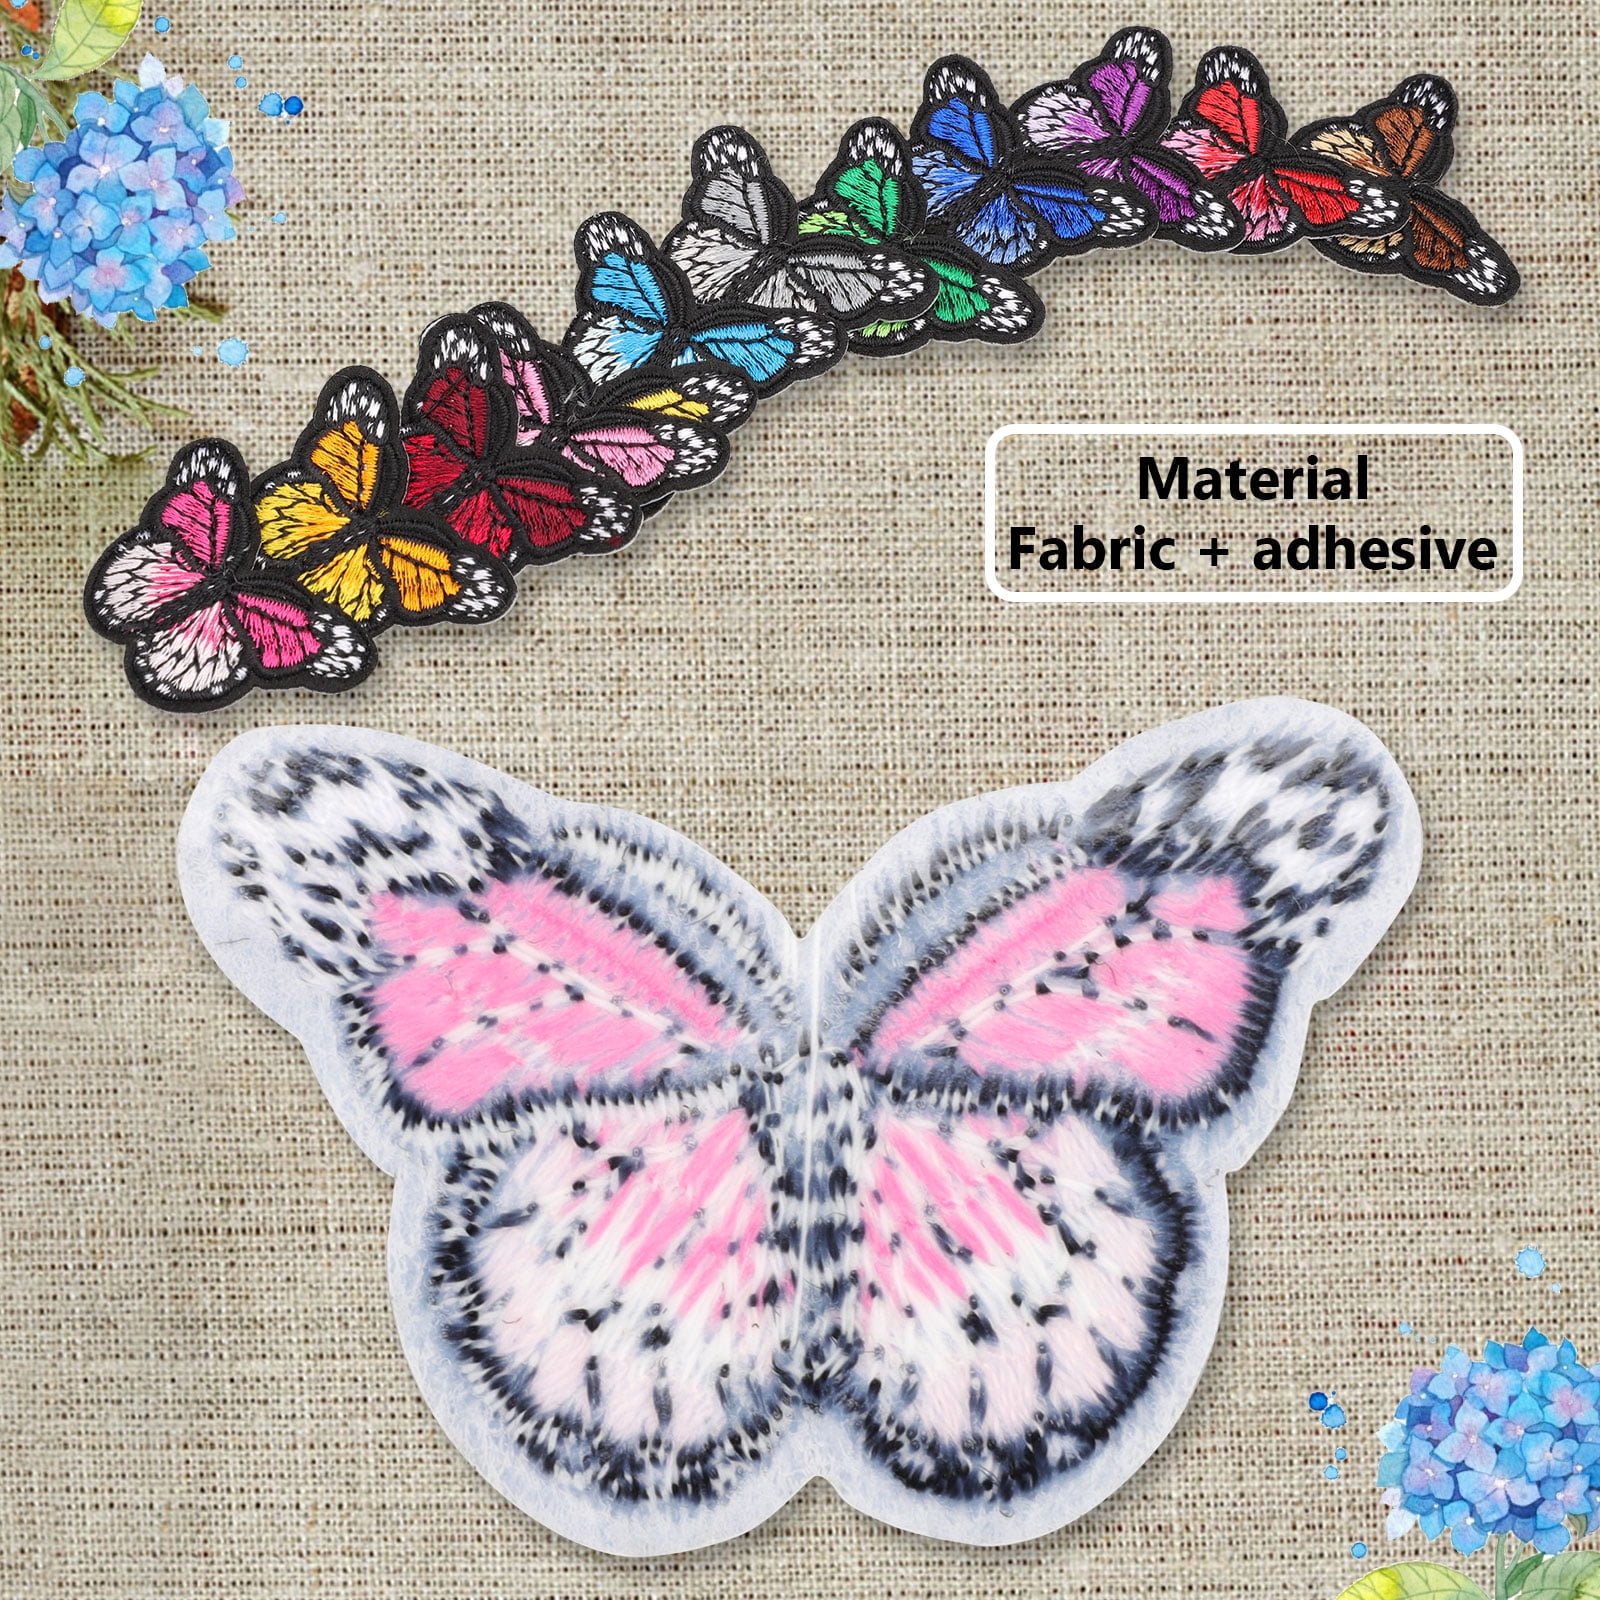 Embroidered Iron Patches Applique Decorative - 17PCS Back to School Iron On  Patches, Colorful School Sew Applique Crafts Decorative Repair Patch for